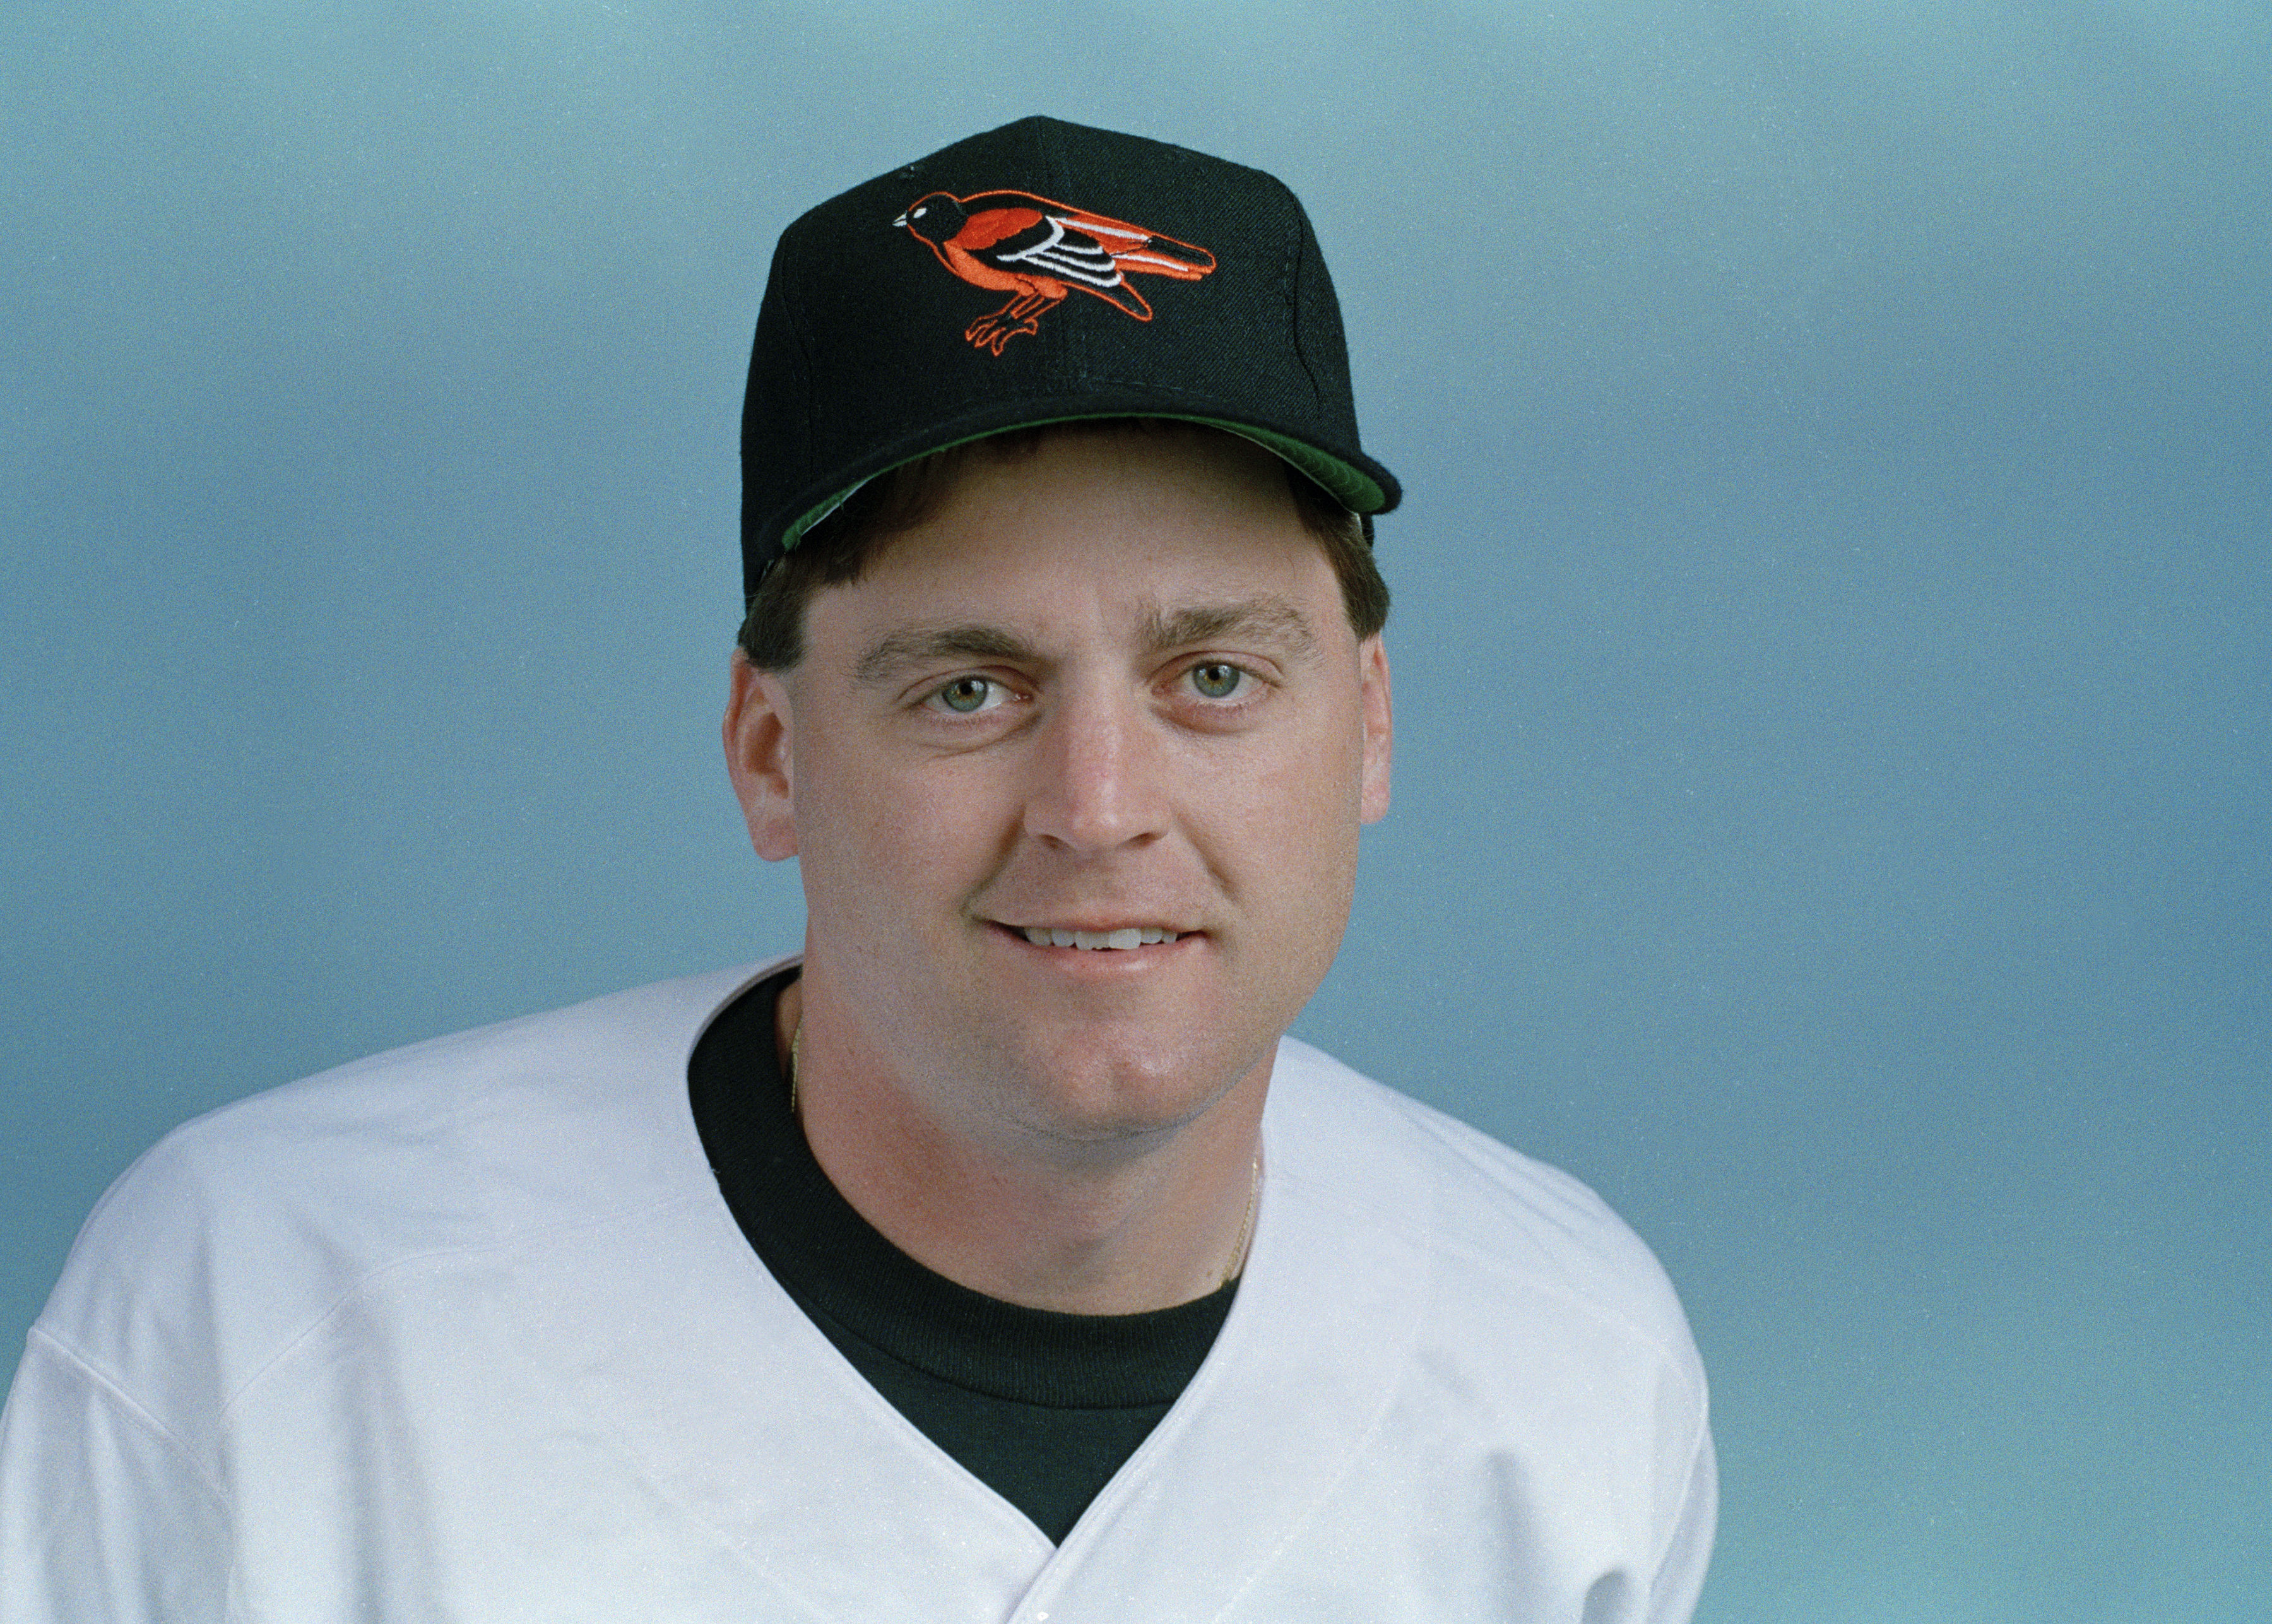 Jim Poole, who pitched for Orioles from 1991 to 1994 amid 11 big